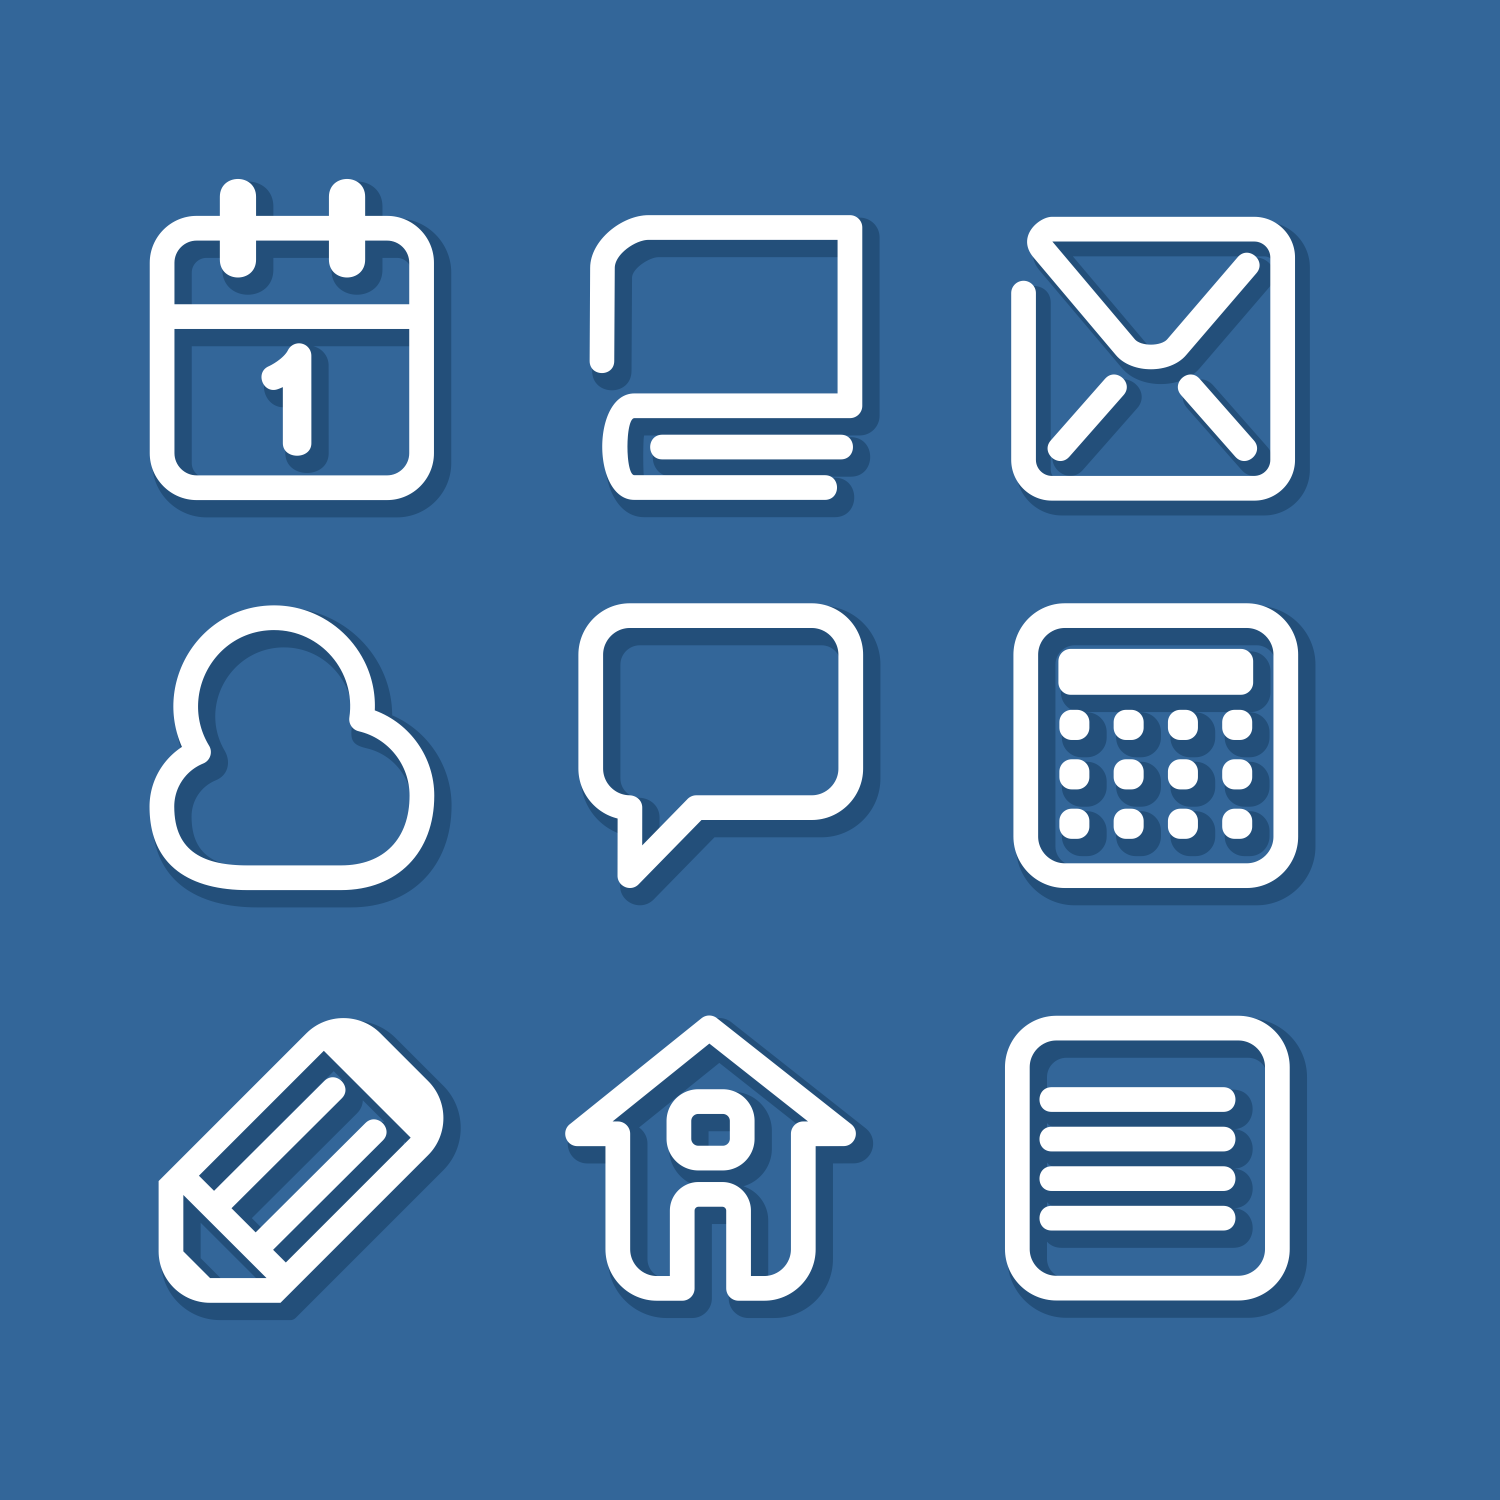 Download Vector for free use: Office icon set